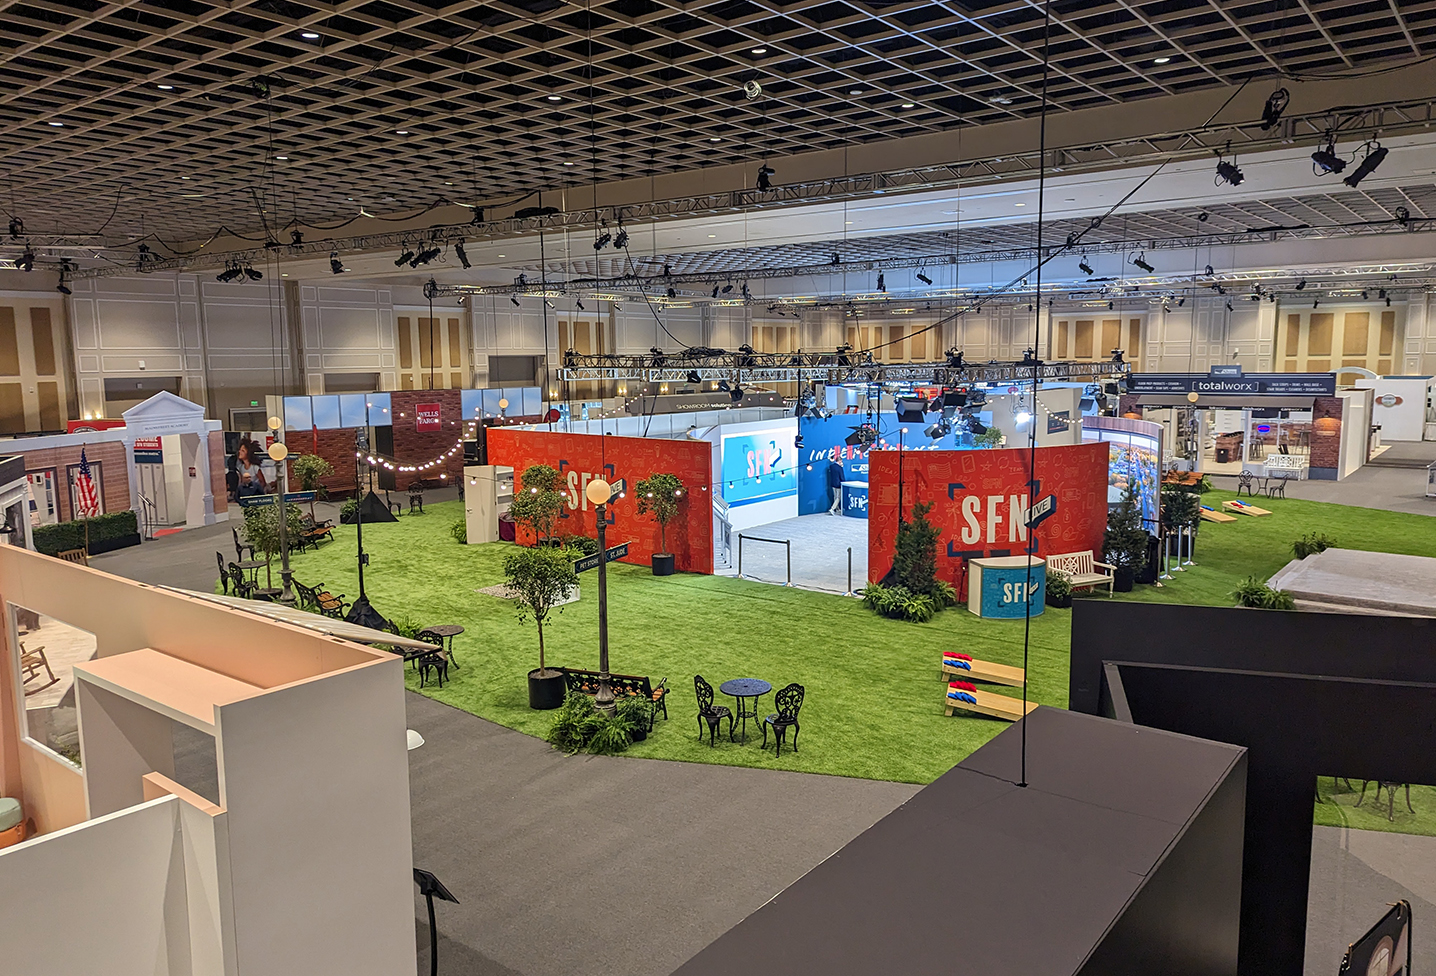 Trade show management SFN from above